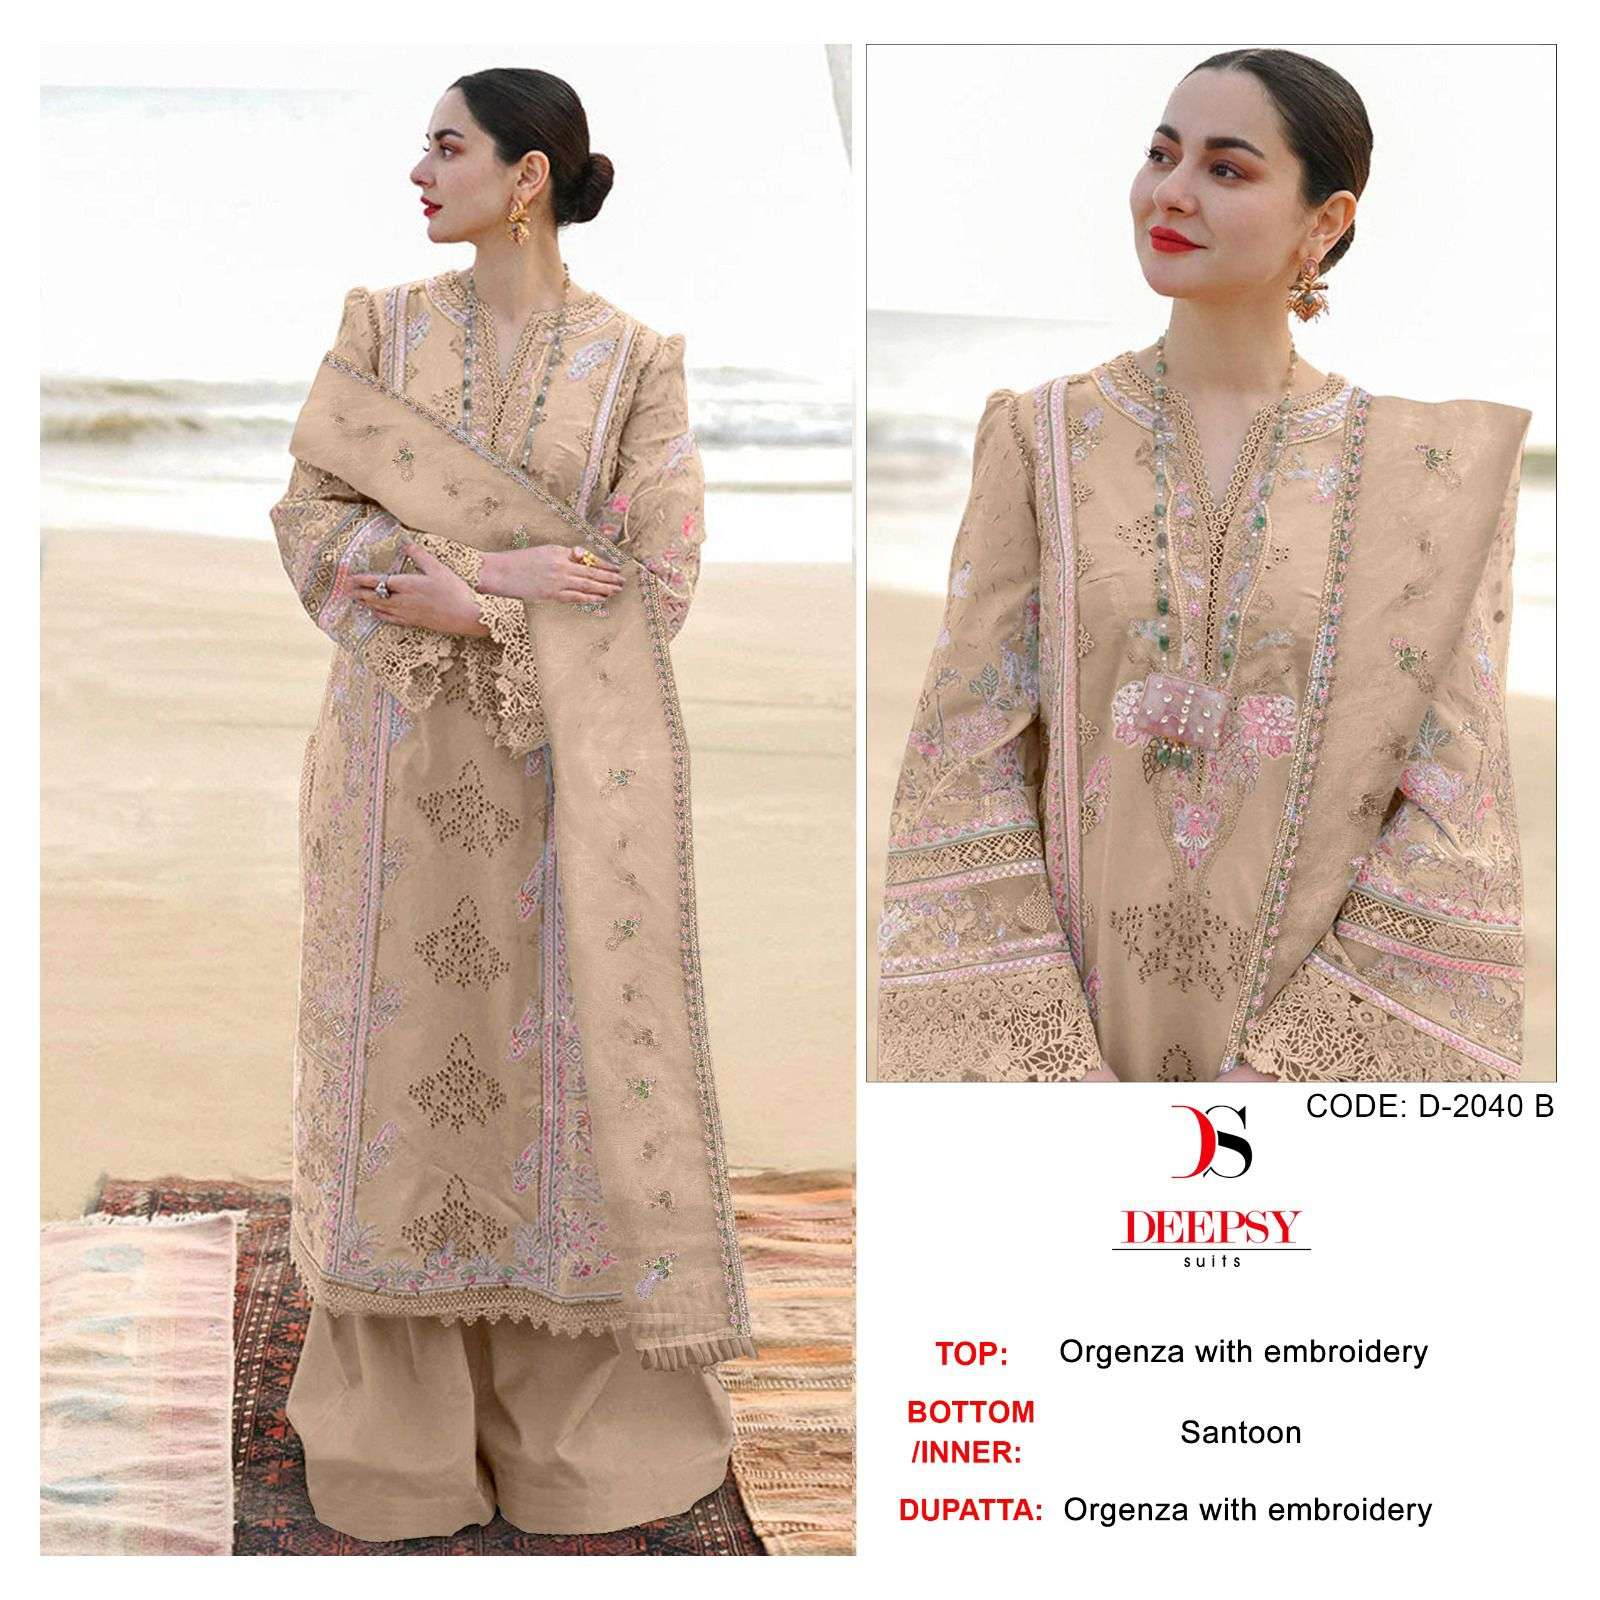 Deepsy Suits 2040 Organza With Embroidery work Pakistani sal...